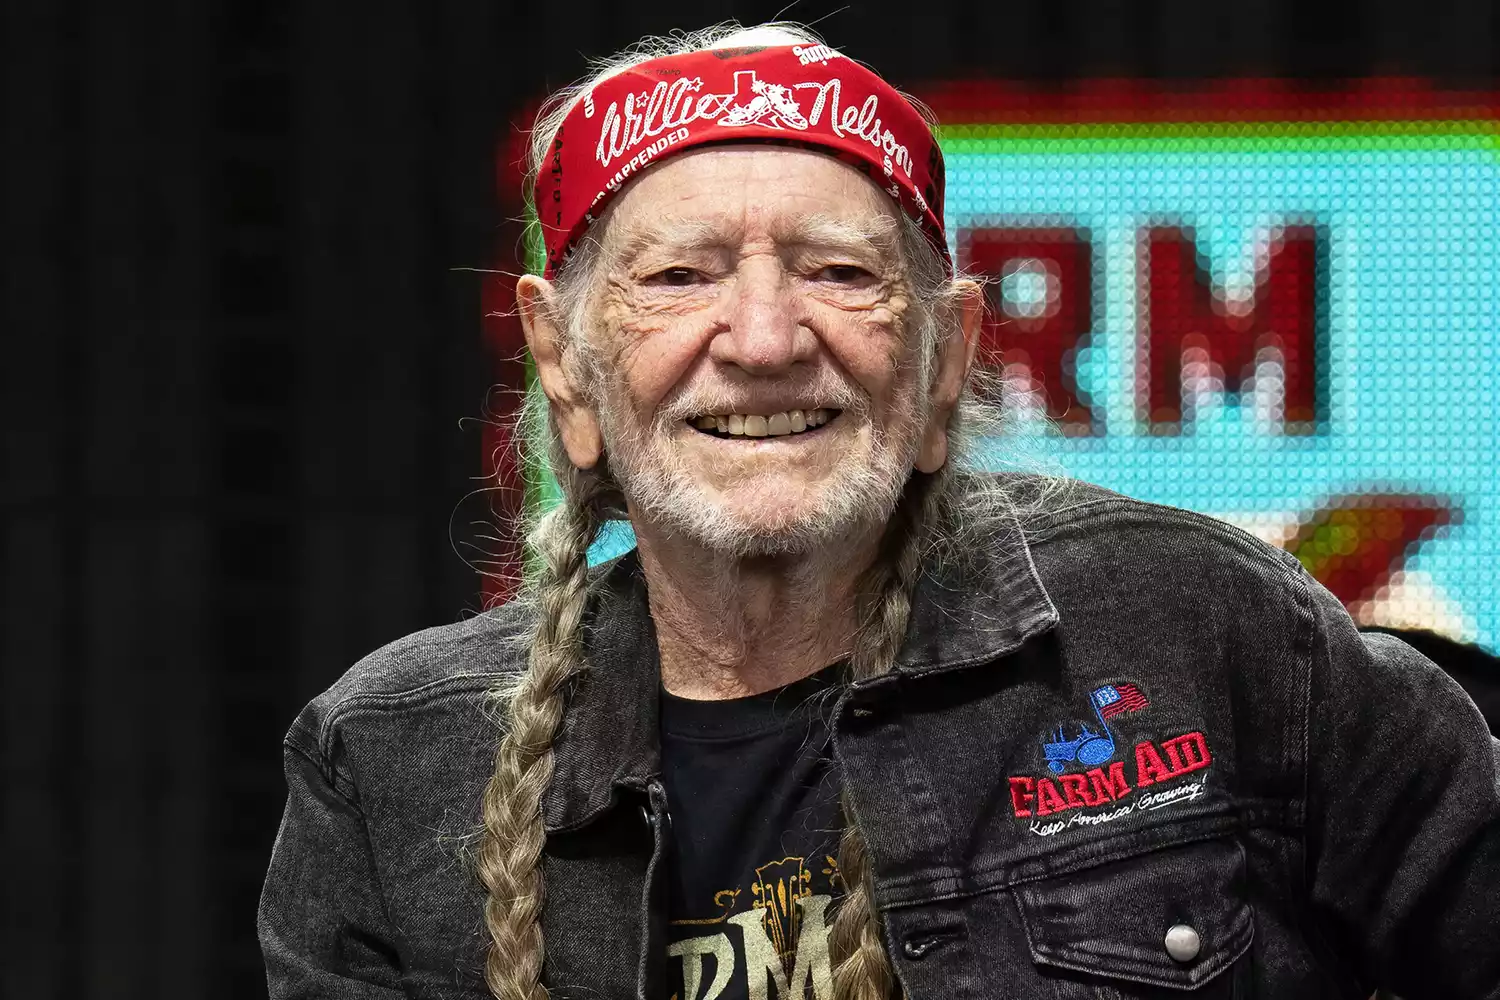 Willie Nelson attends a press conference during the Farm Aid 2022 music festival at the Coastal Credit Union Music Park on September 24, 2022 in Raleigh, North Carolina.